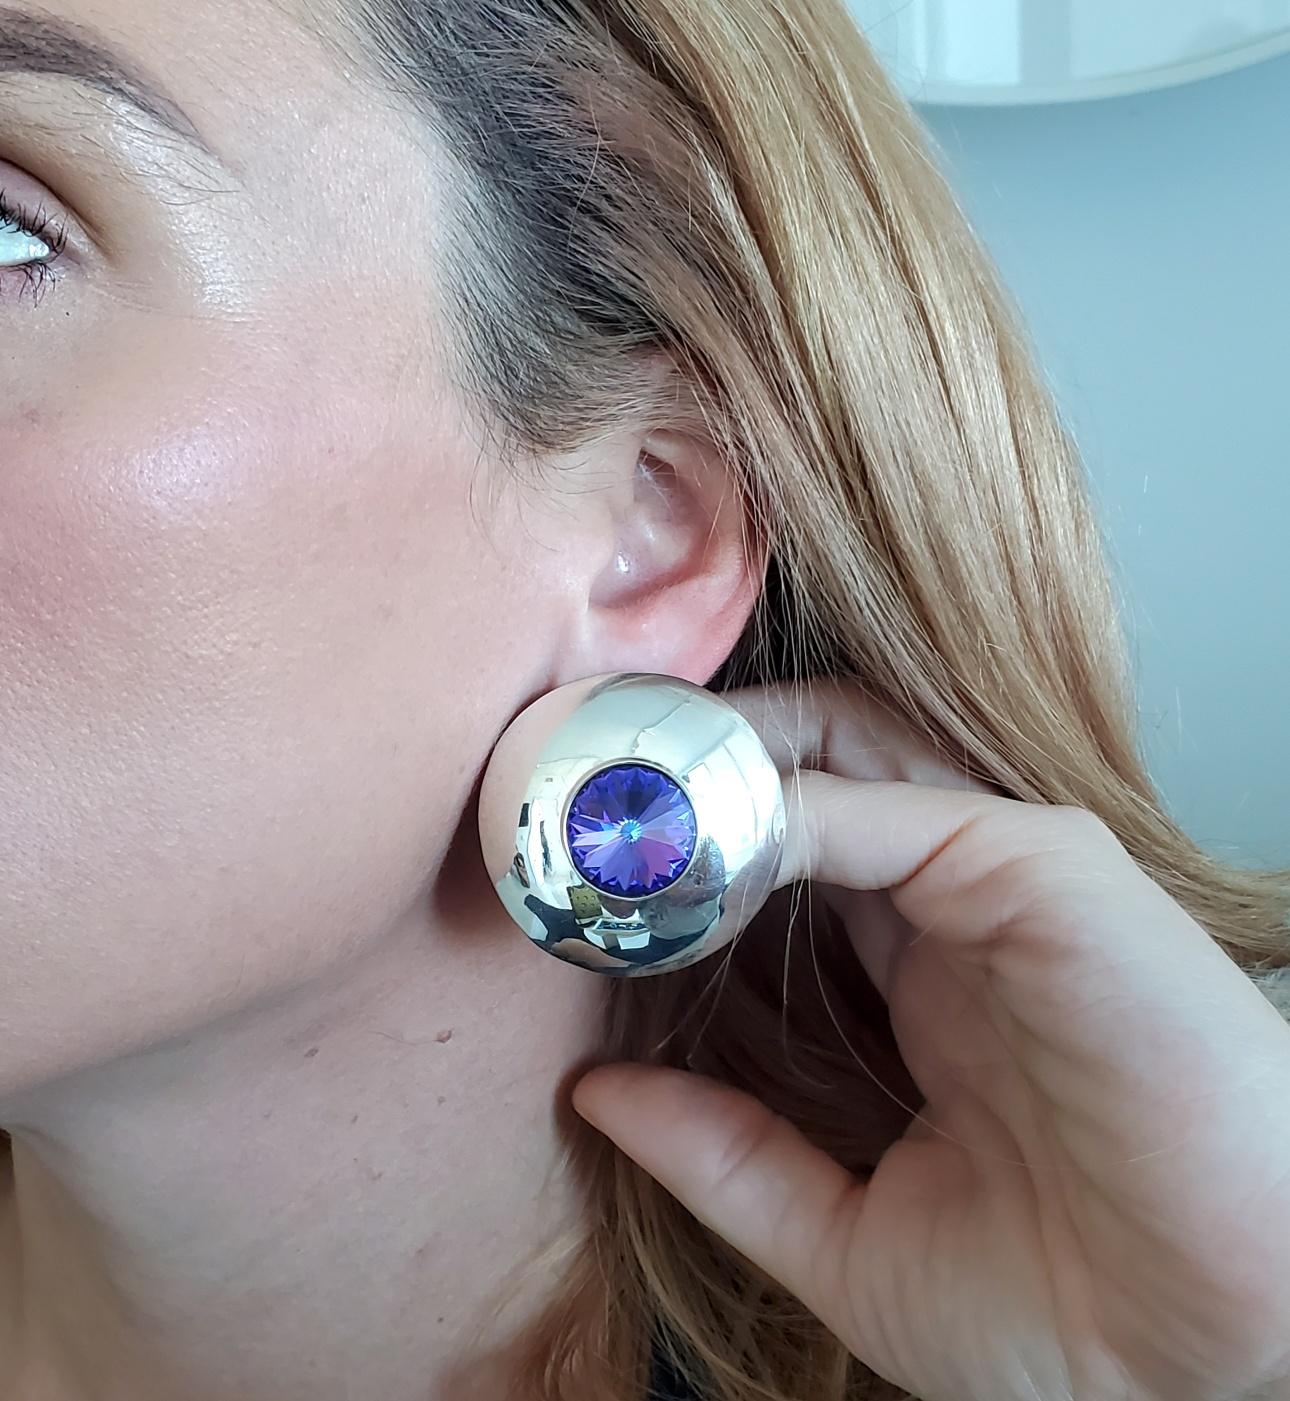 Retro modernist Earrings In Sterling Silver designed by the Atelier Alicia.

Beautiful psychedelic pair of earrings, created in Taxco Mexico back in the 1970. This colorful stylish pair is surely a one of a kind piece, designed with retro-modernist